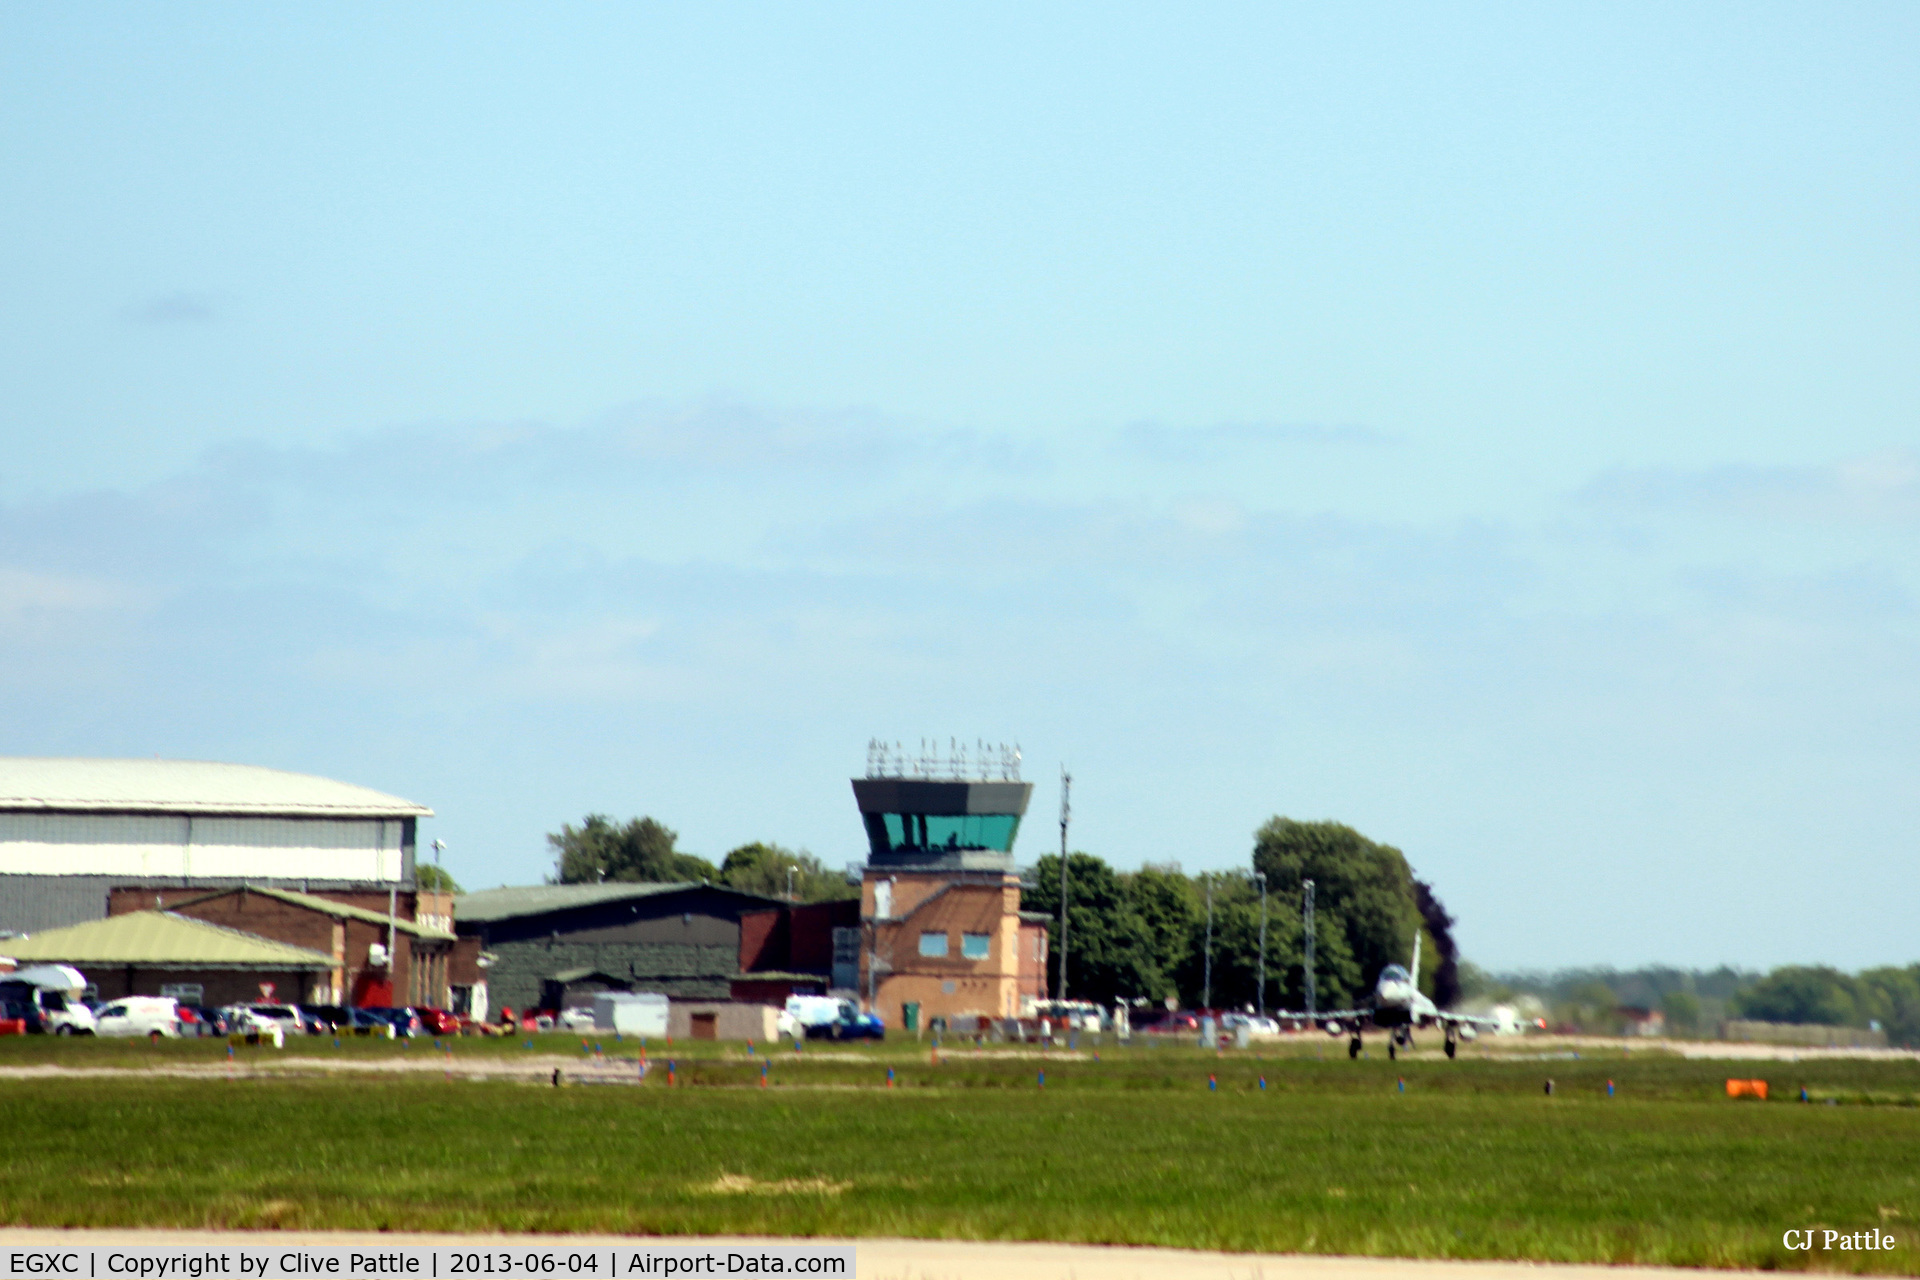 RAF Coningsby Airport, Coningsby, England United Kingdom (EGXC) - ATC Tower and airfield view at RAF Coningsby